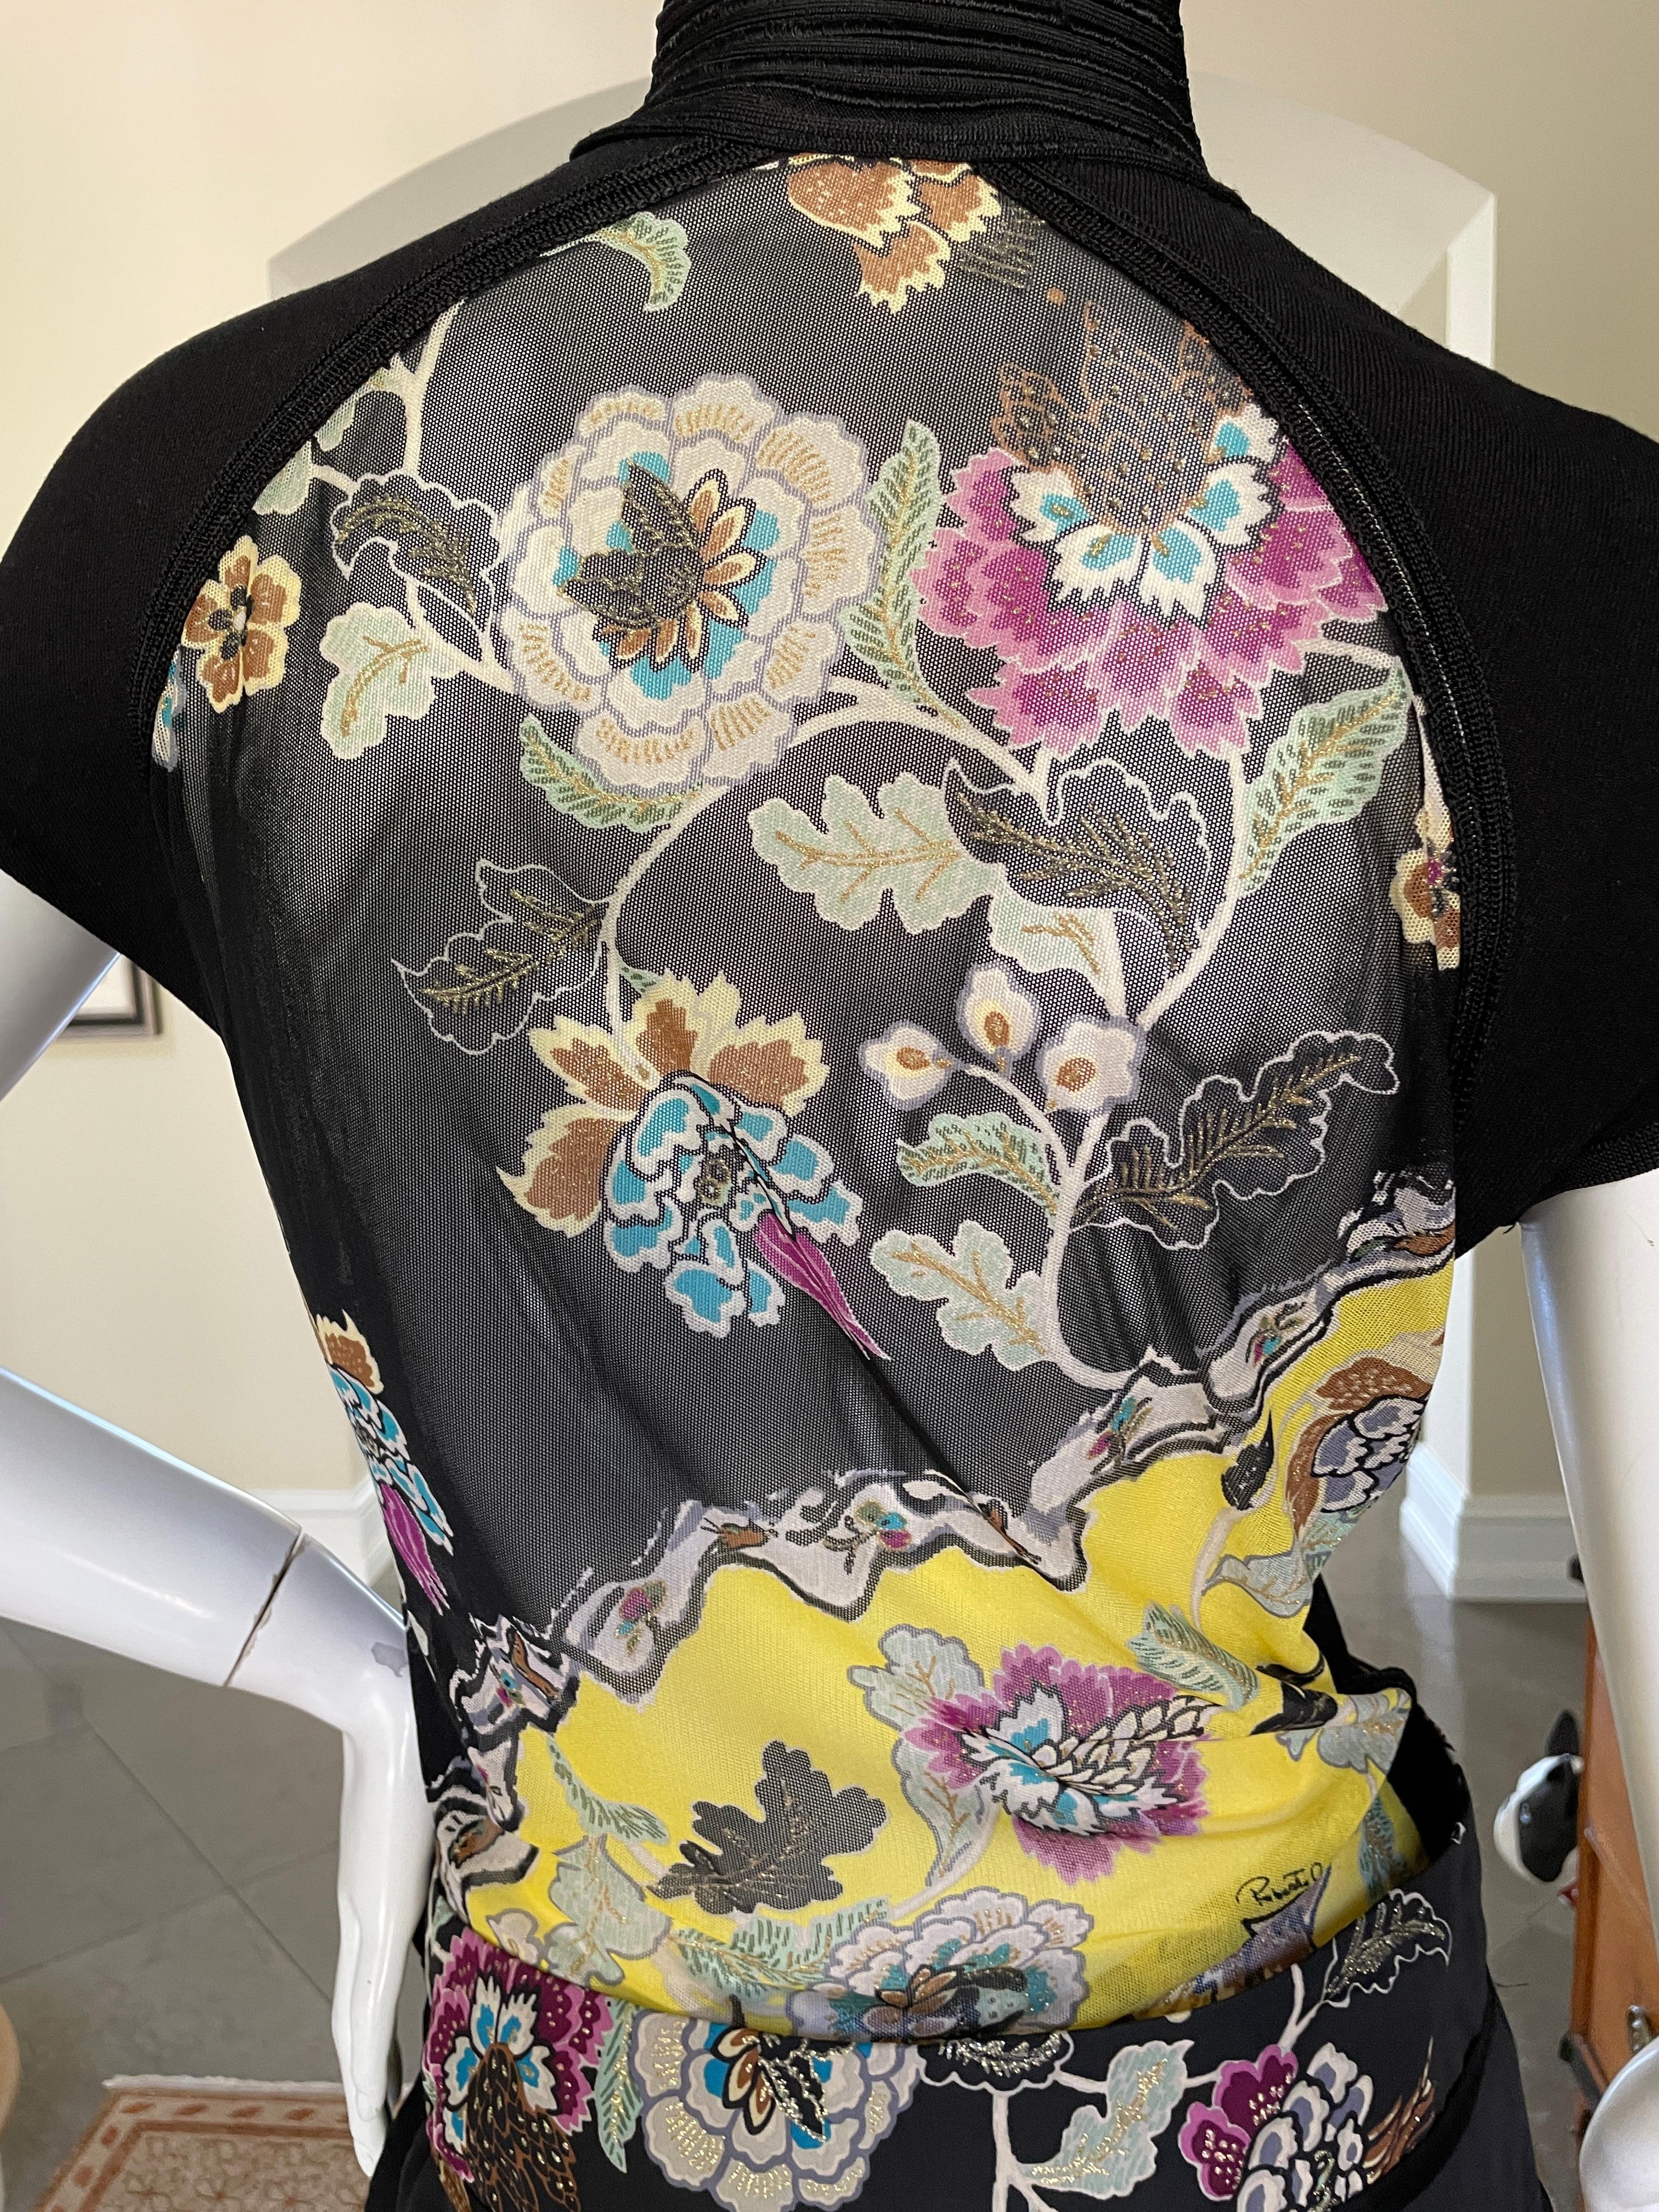 Roberto Cavalli Spring 2003 Silk Cheongsam Style Floral Dress Set w Skirt & Top In Excellent Condition For Sale In Cloverdale, CA